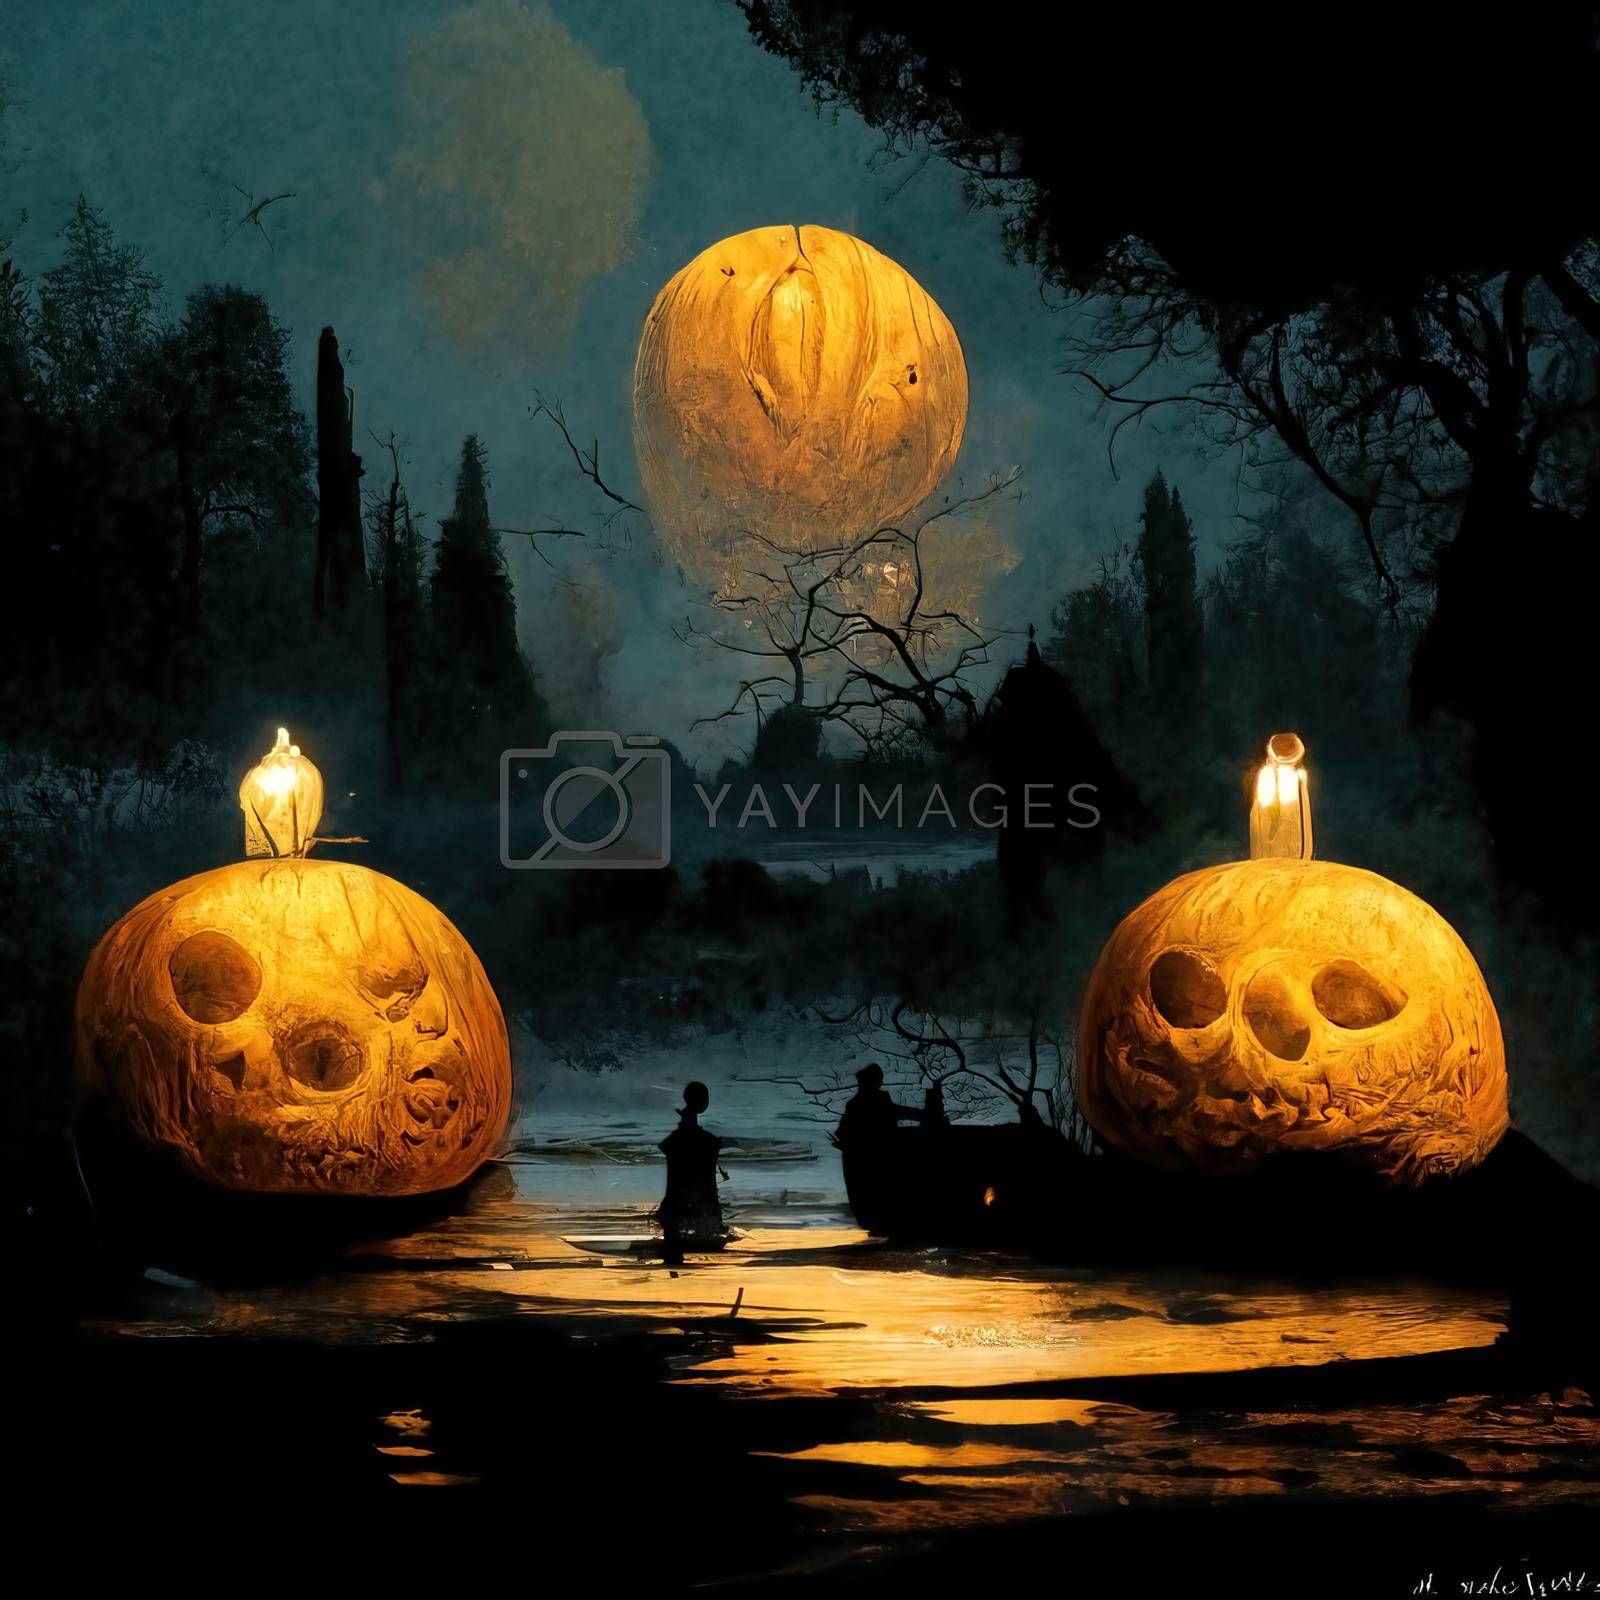 Royalty free image of Pumpkins in the graveyard, spooky night, 3d Illustration by Farcas